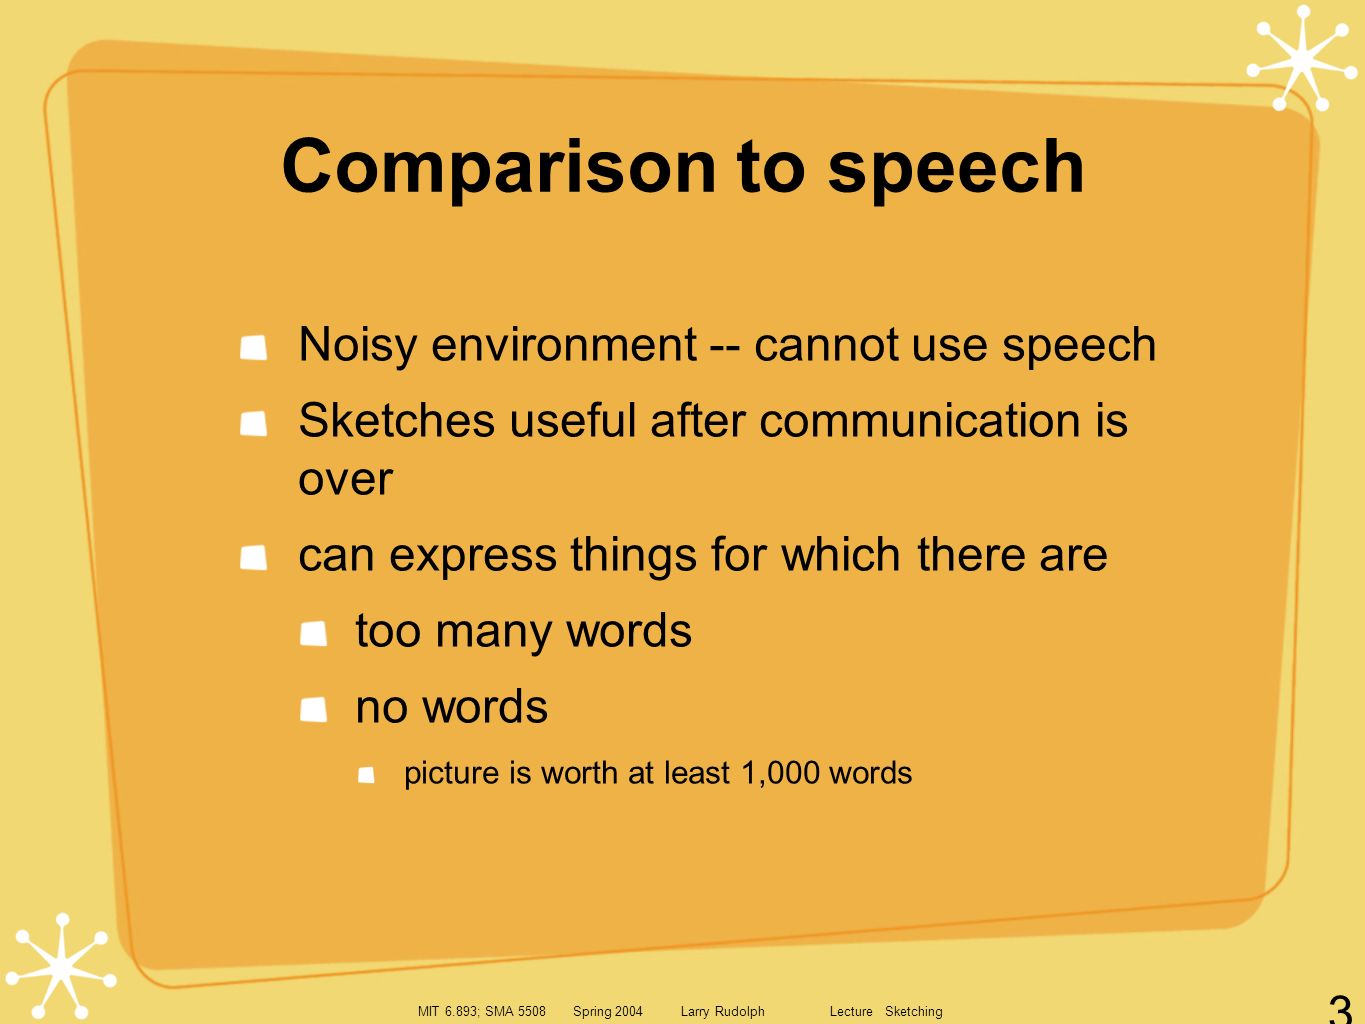 MIT 6.893; SMA 5508 Spring 2004 Larry Rudolph Lecture Sketching 3 Comparison to speech Noisy environment -- cannot use speech Sketches useful after communication is over can express things for which there are too many words no words picture is worth at least 1,000 words